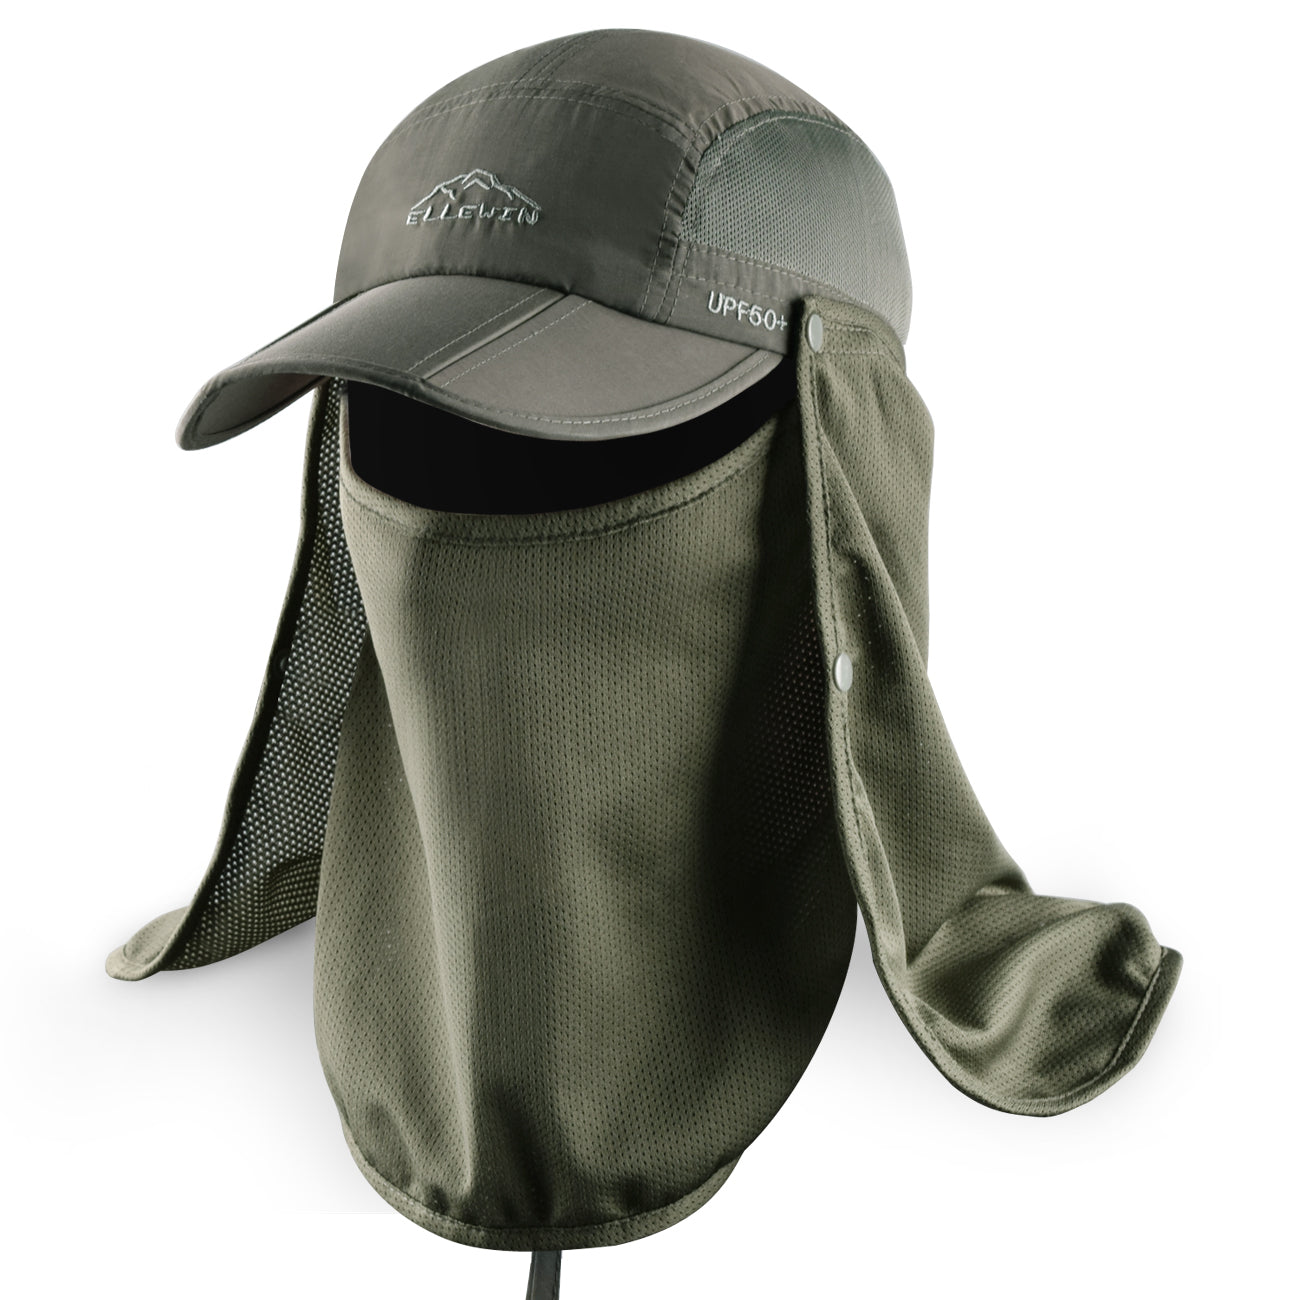 ELLEWIN Fishing Hat with Face and Neck Face Flap for Sun Protection